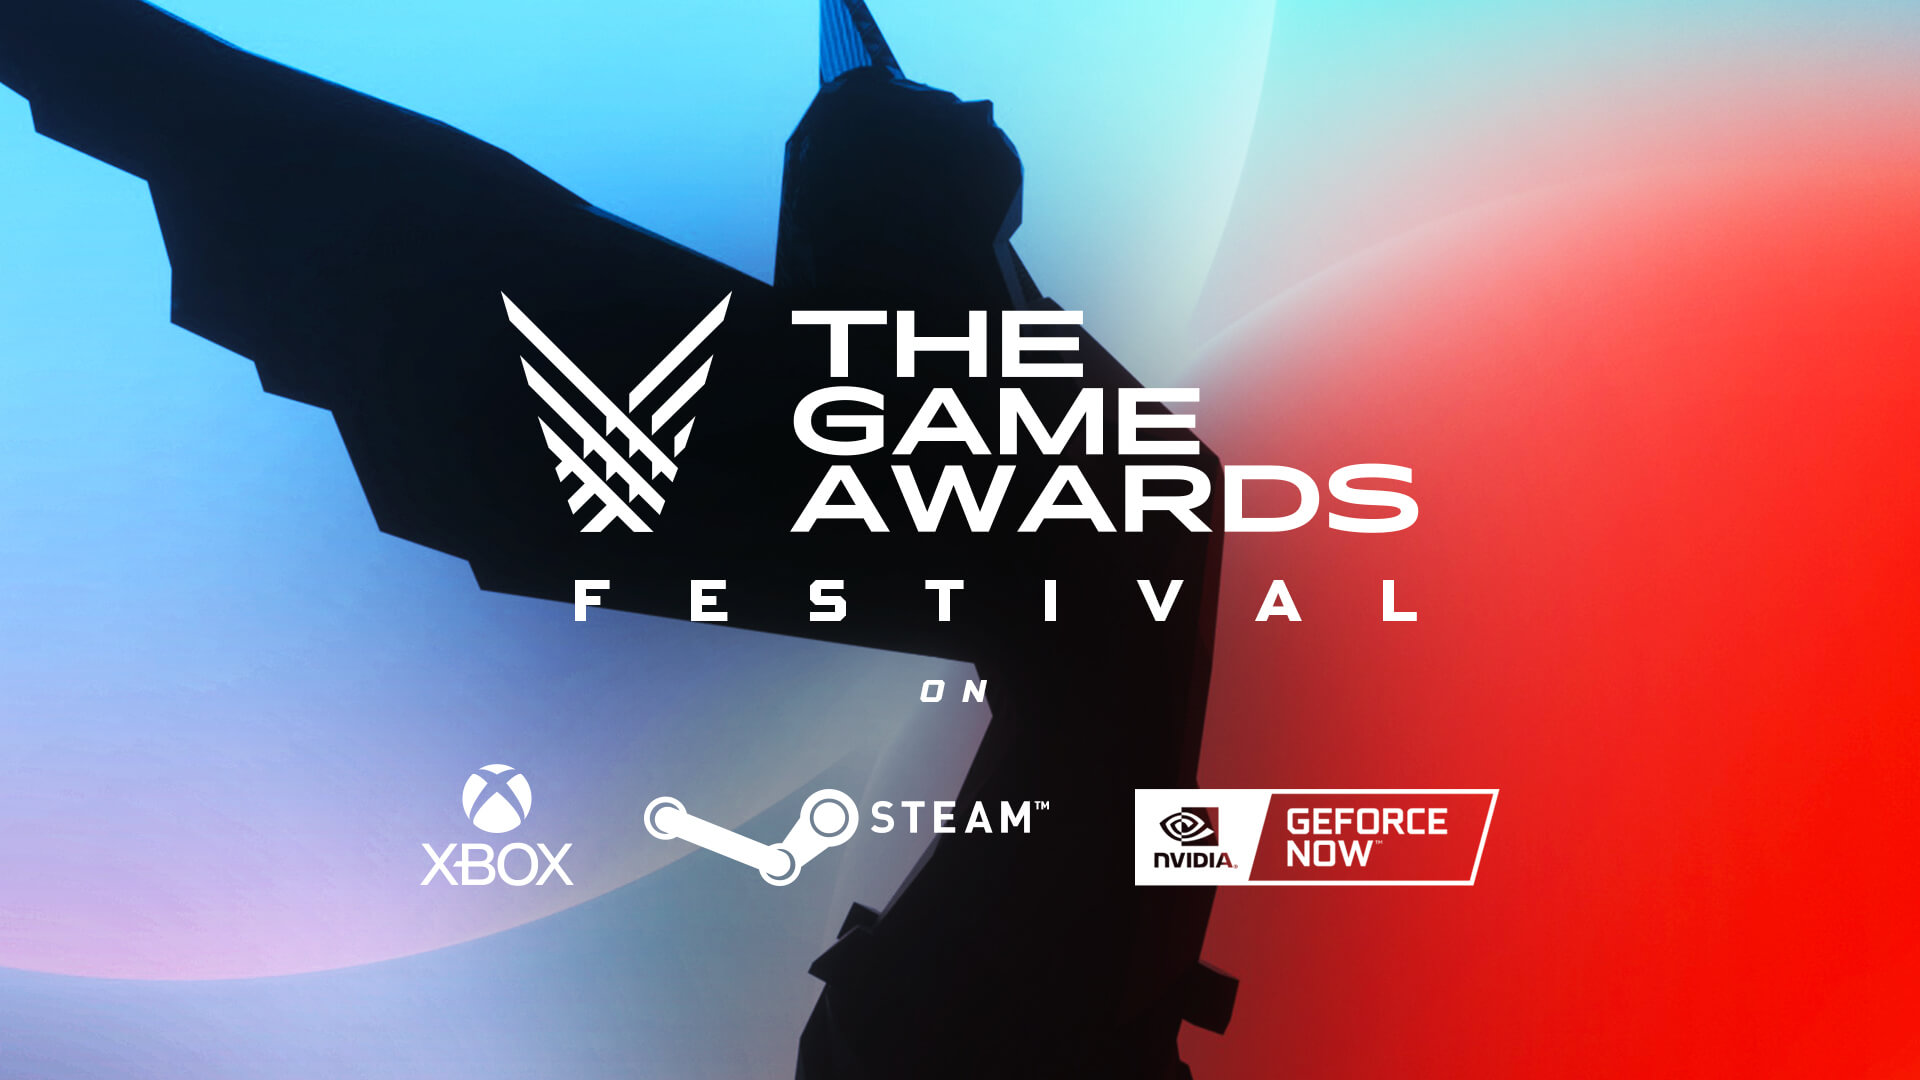 THE GAME AWARDS FESTIVAL ON STEAM/XBOX/GEFORCE NOW News The Game Awards